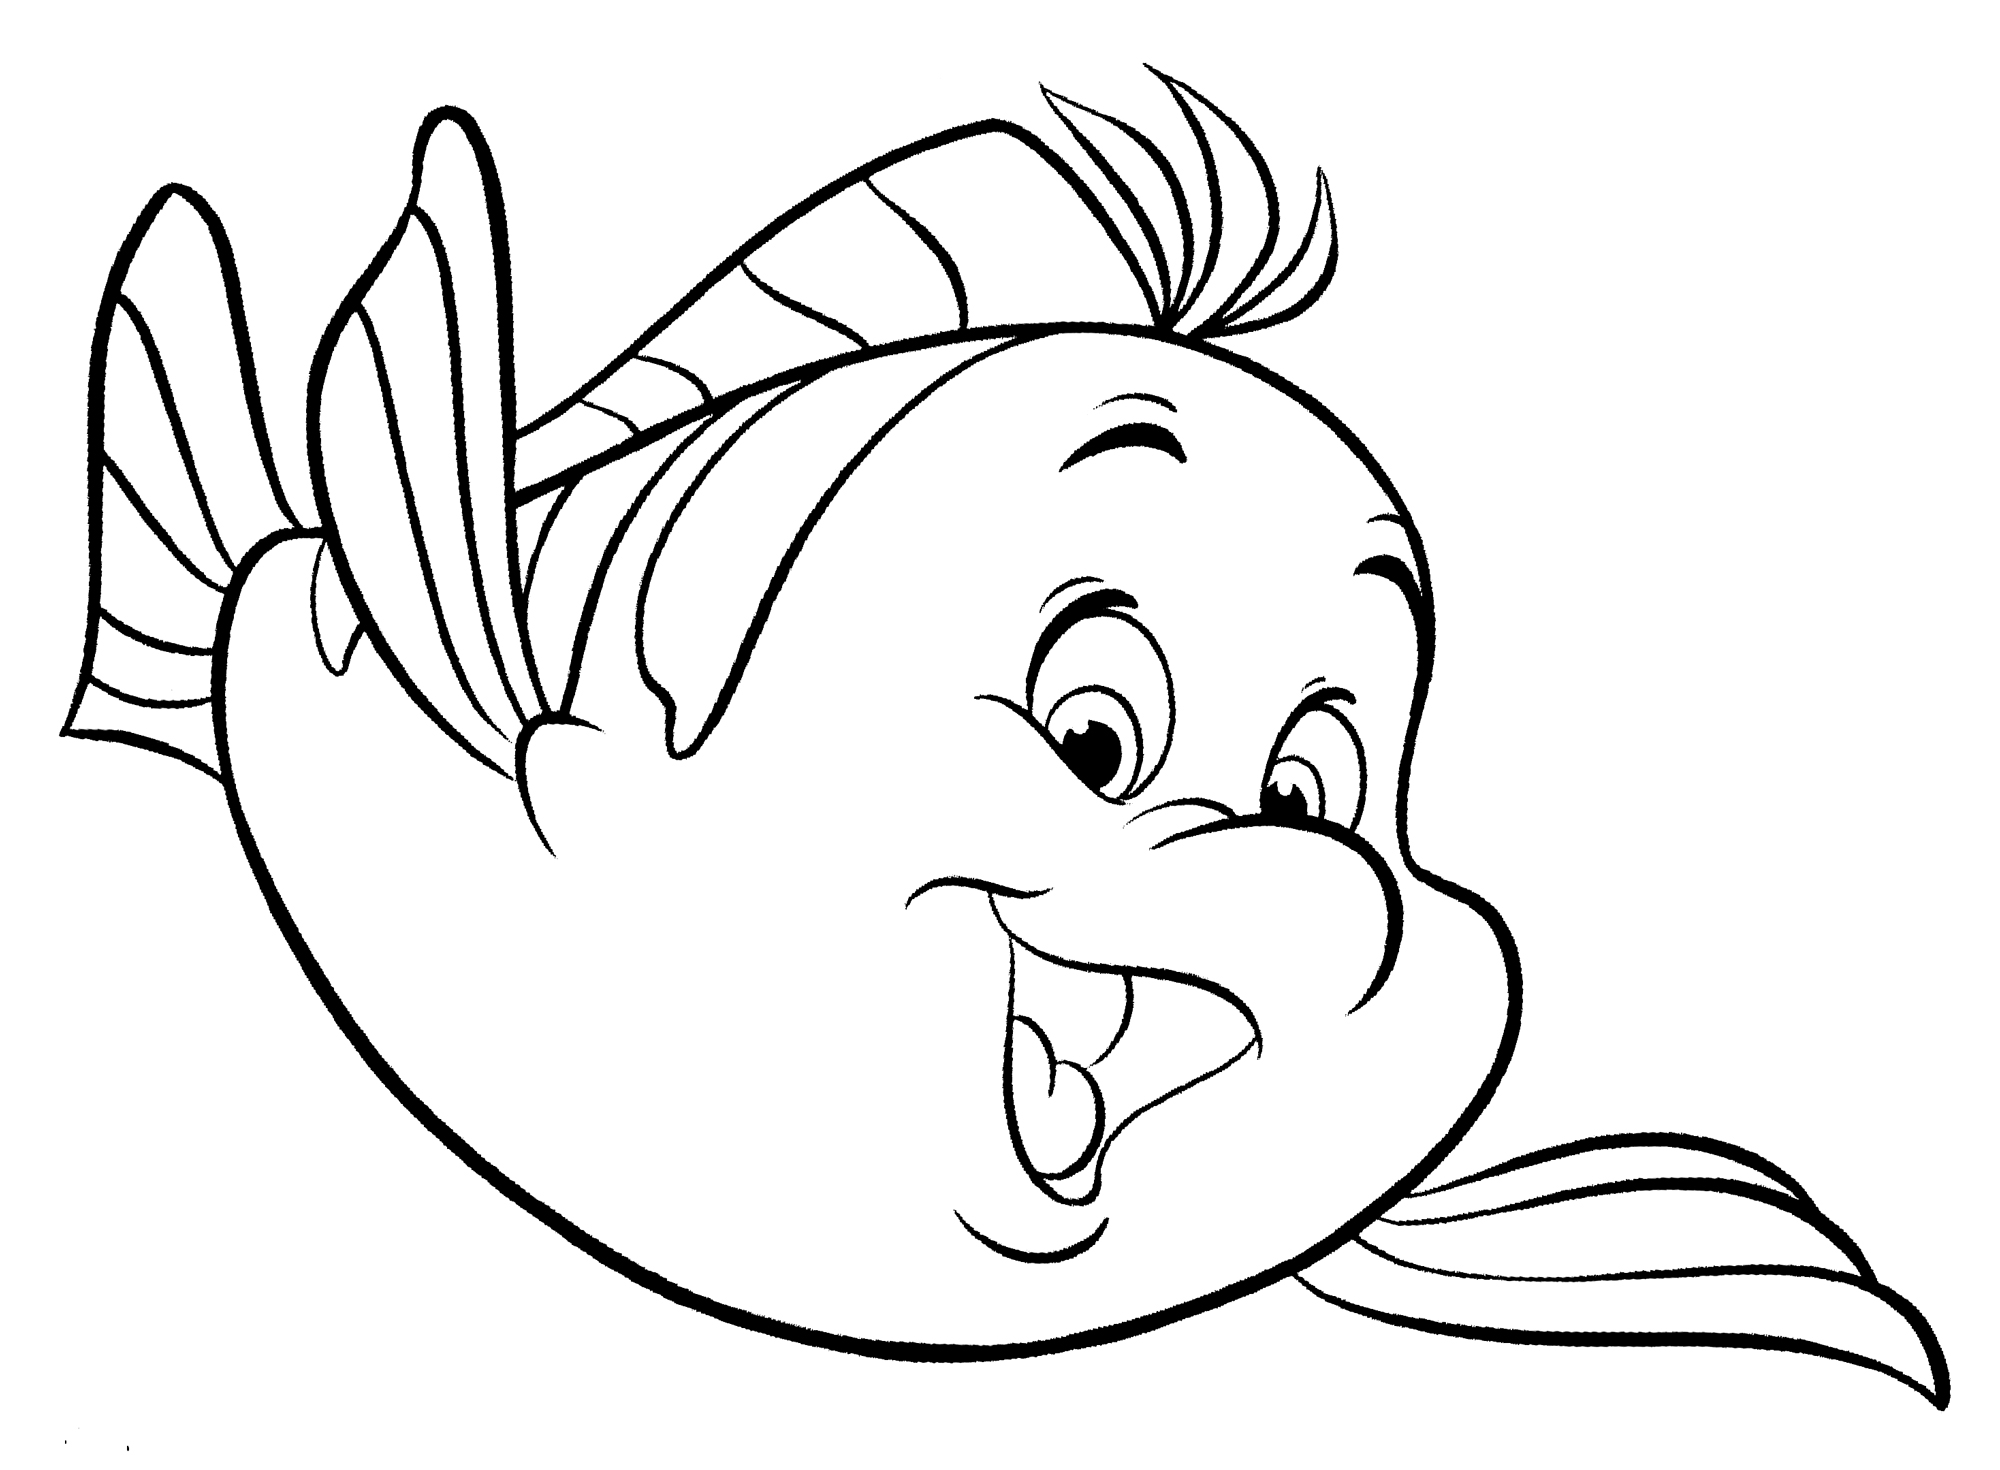 Fish Flounder coloring page - free and printable